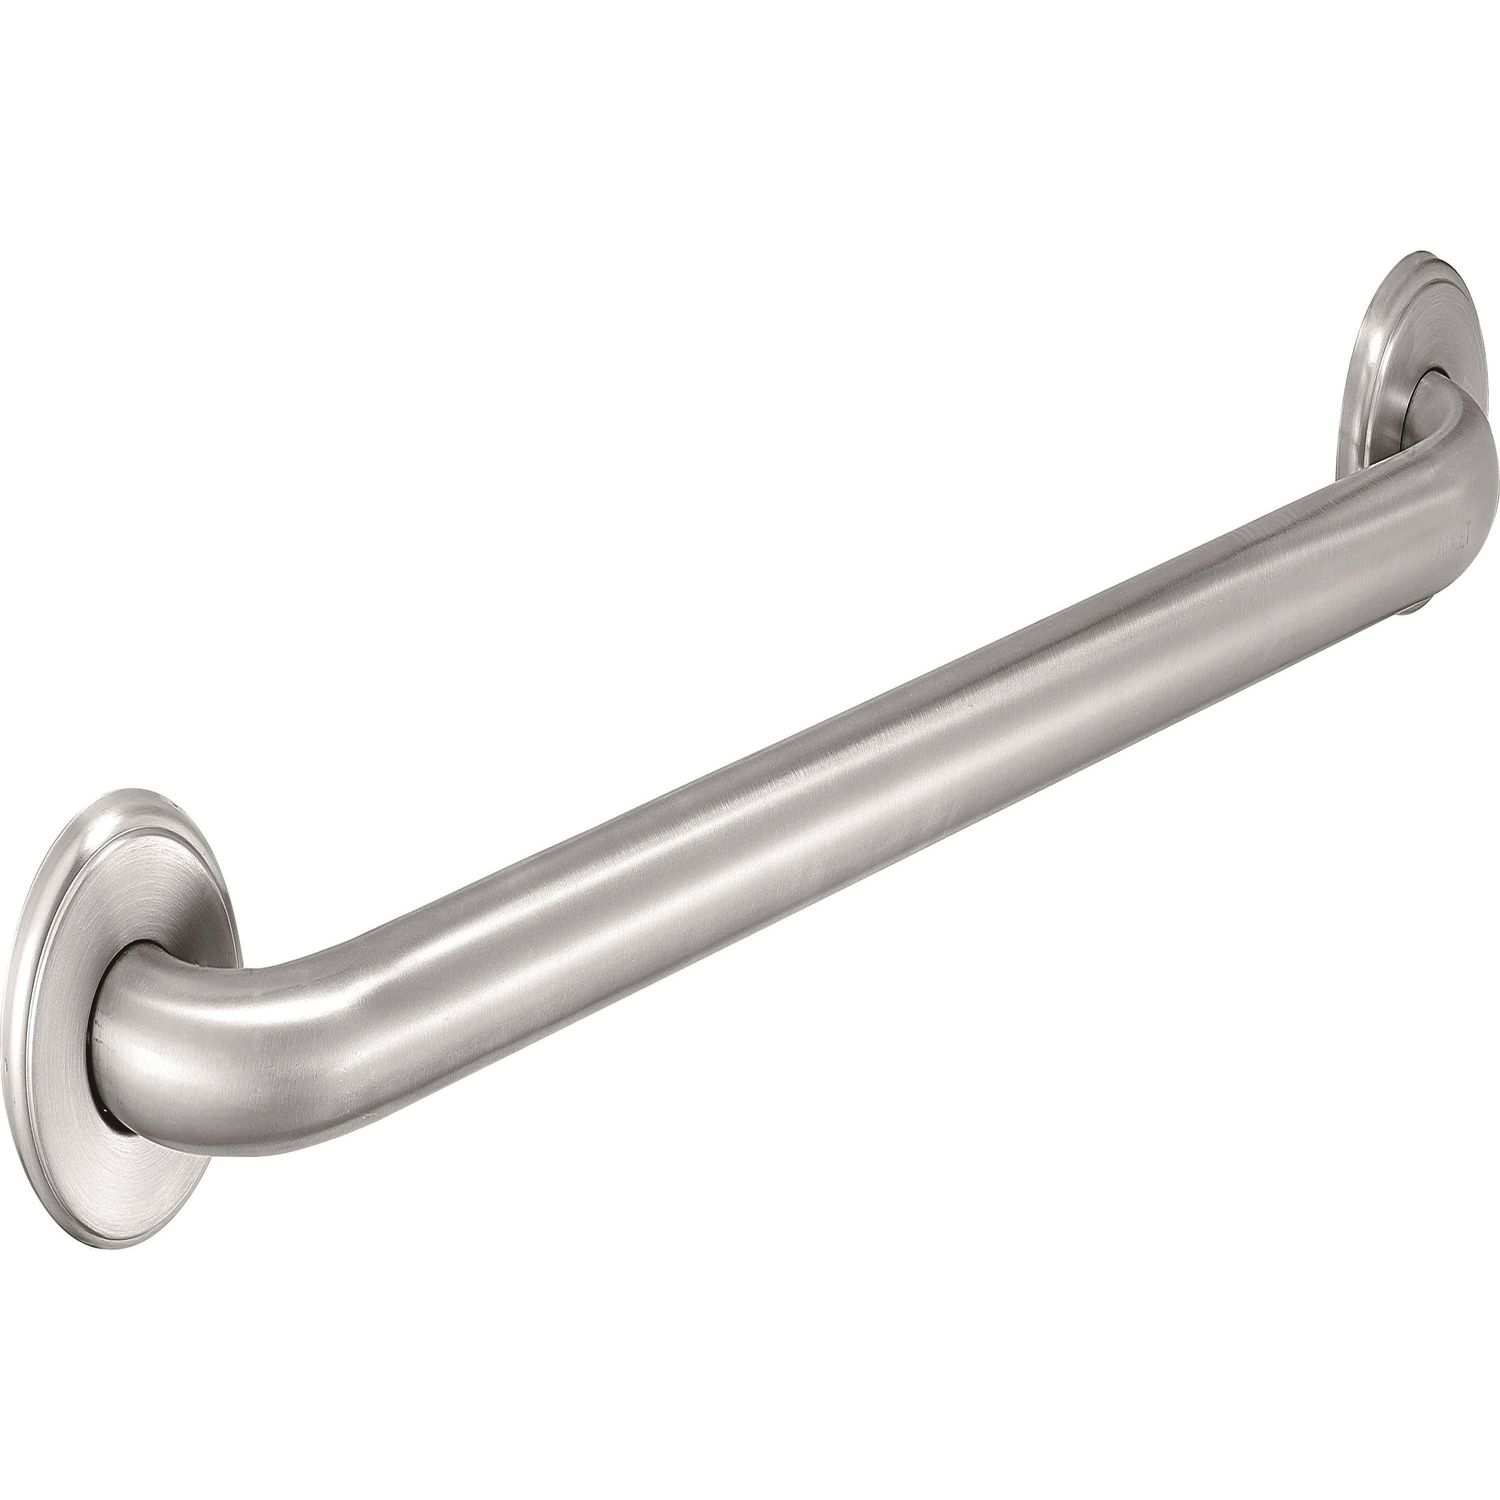 Grab Bar 3.3" Width x 3.3" Height x 21.3" Length, 1 Each, Silver, Stainless Steel